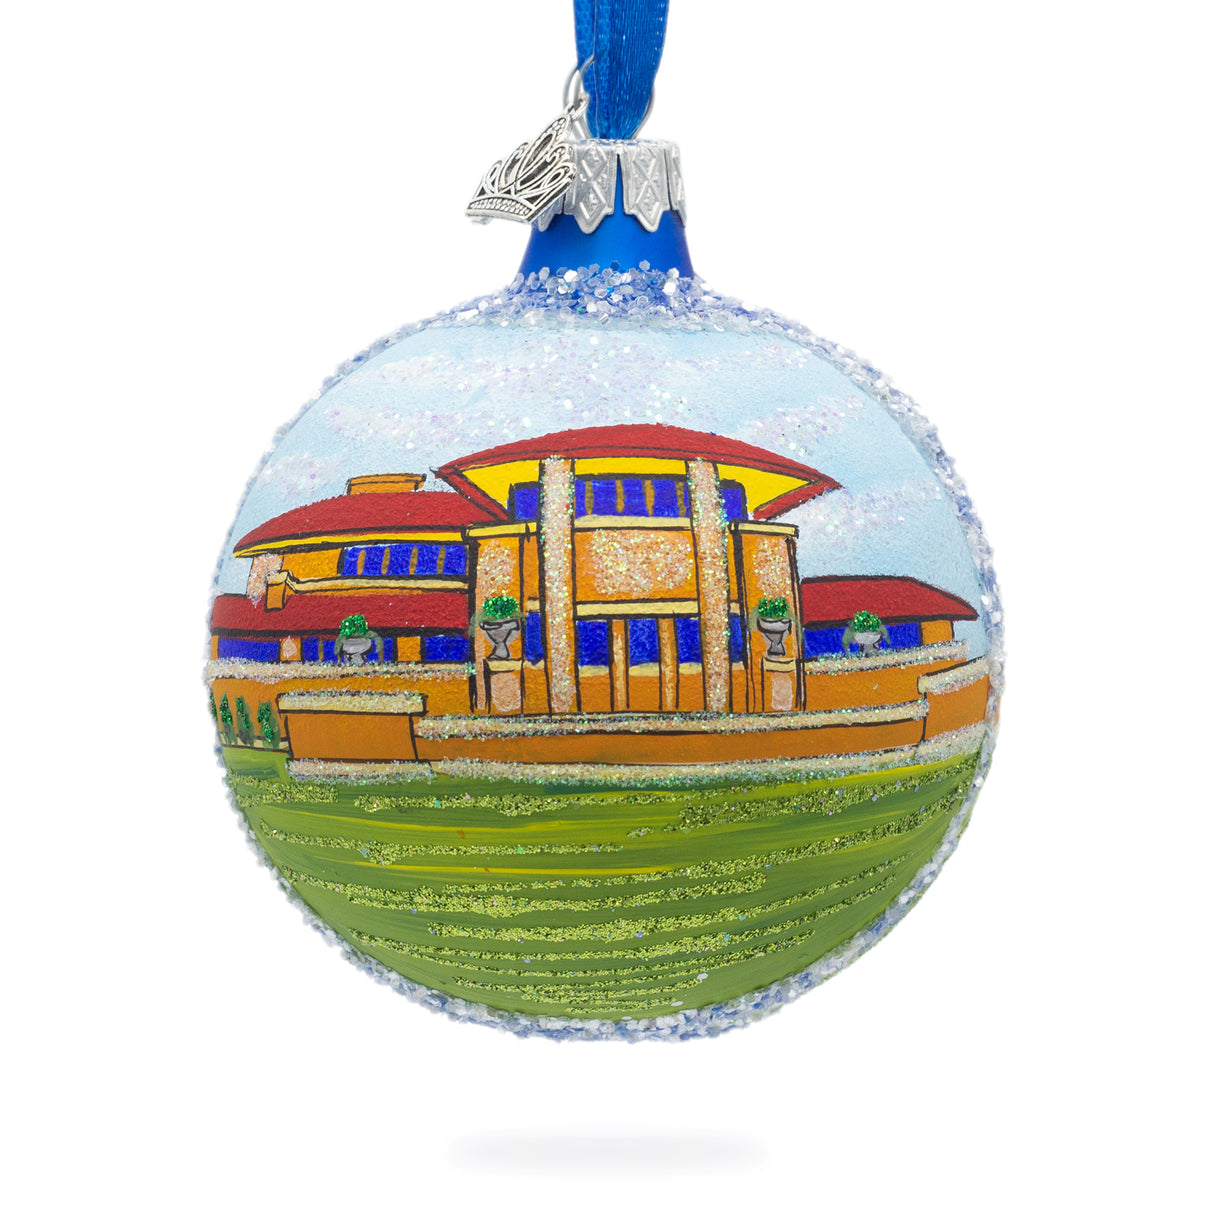 Frank Lloyd Wright's Martin House, Buffalo, New York, USA Glass Ball Christmas Ornament 3.25 Inches in Multi color, Round shape